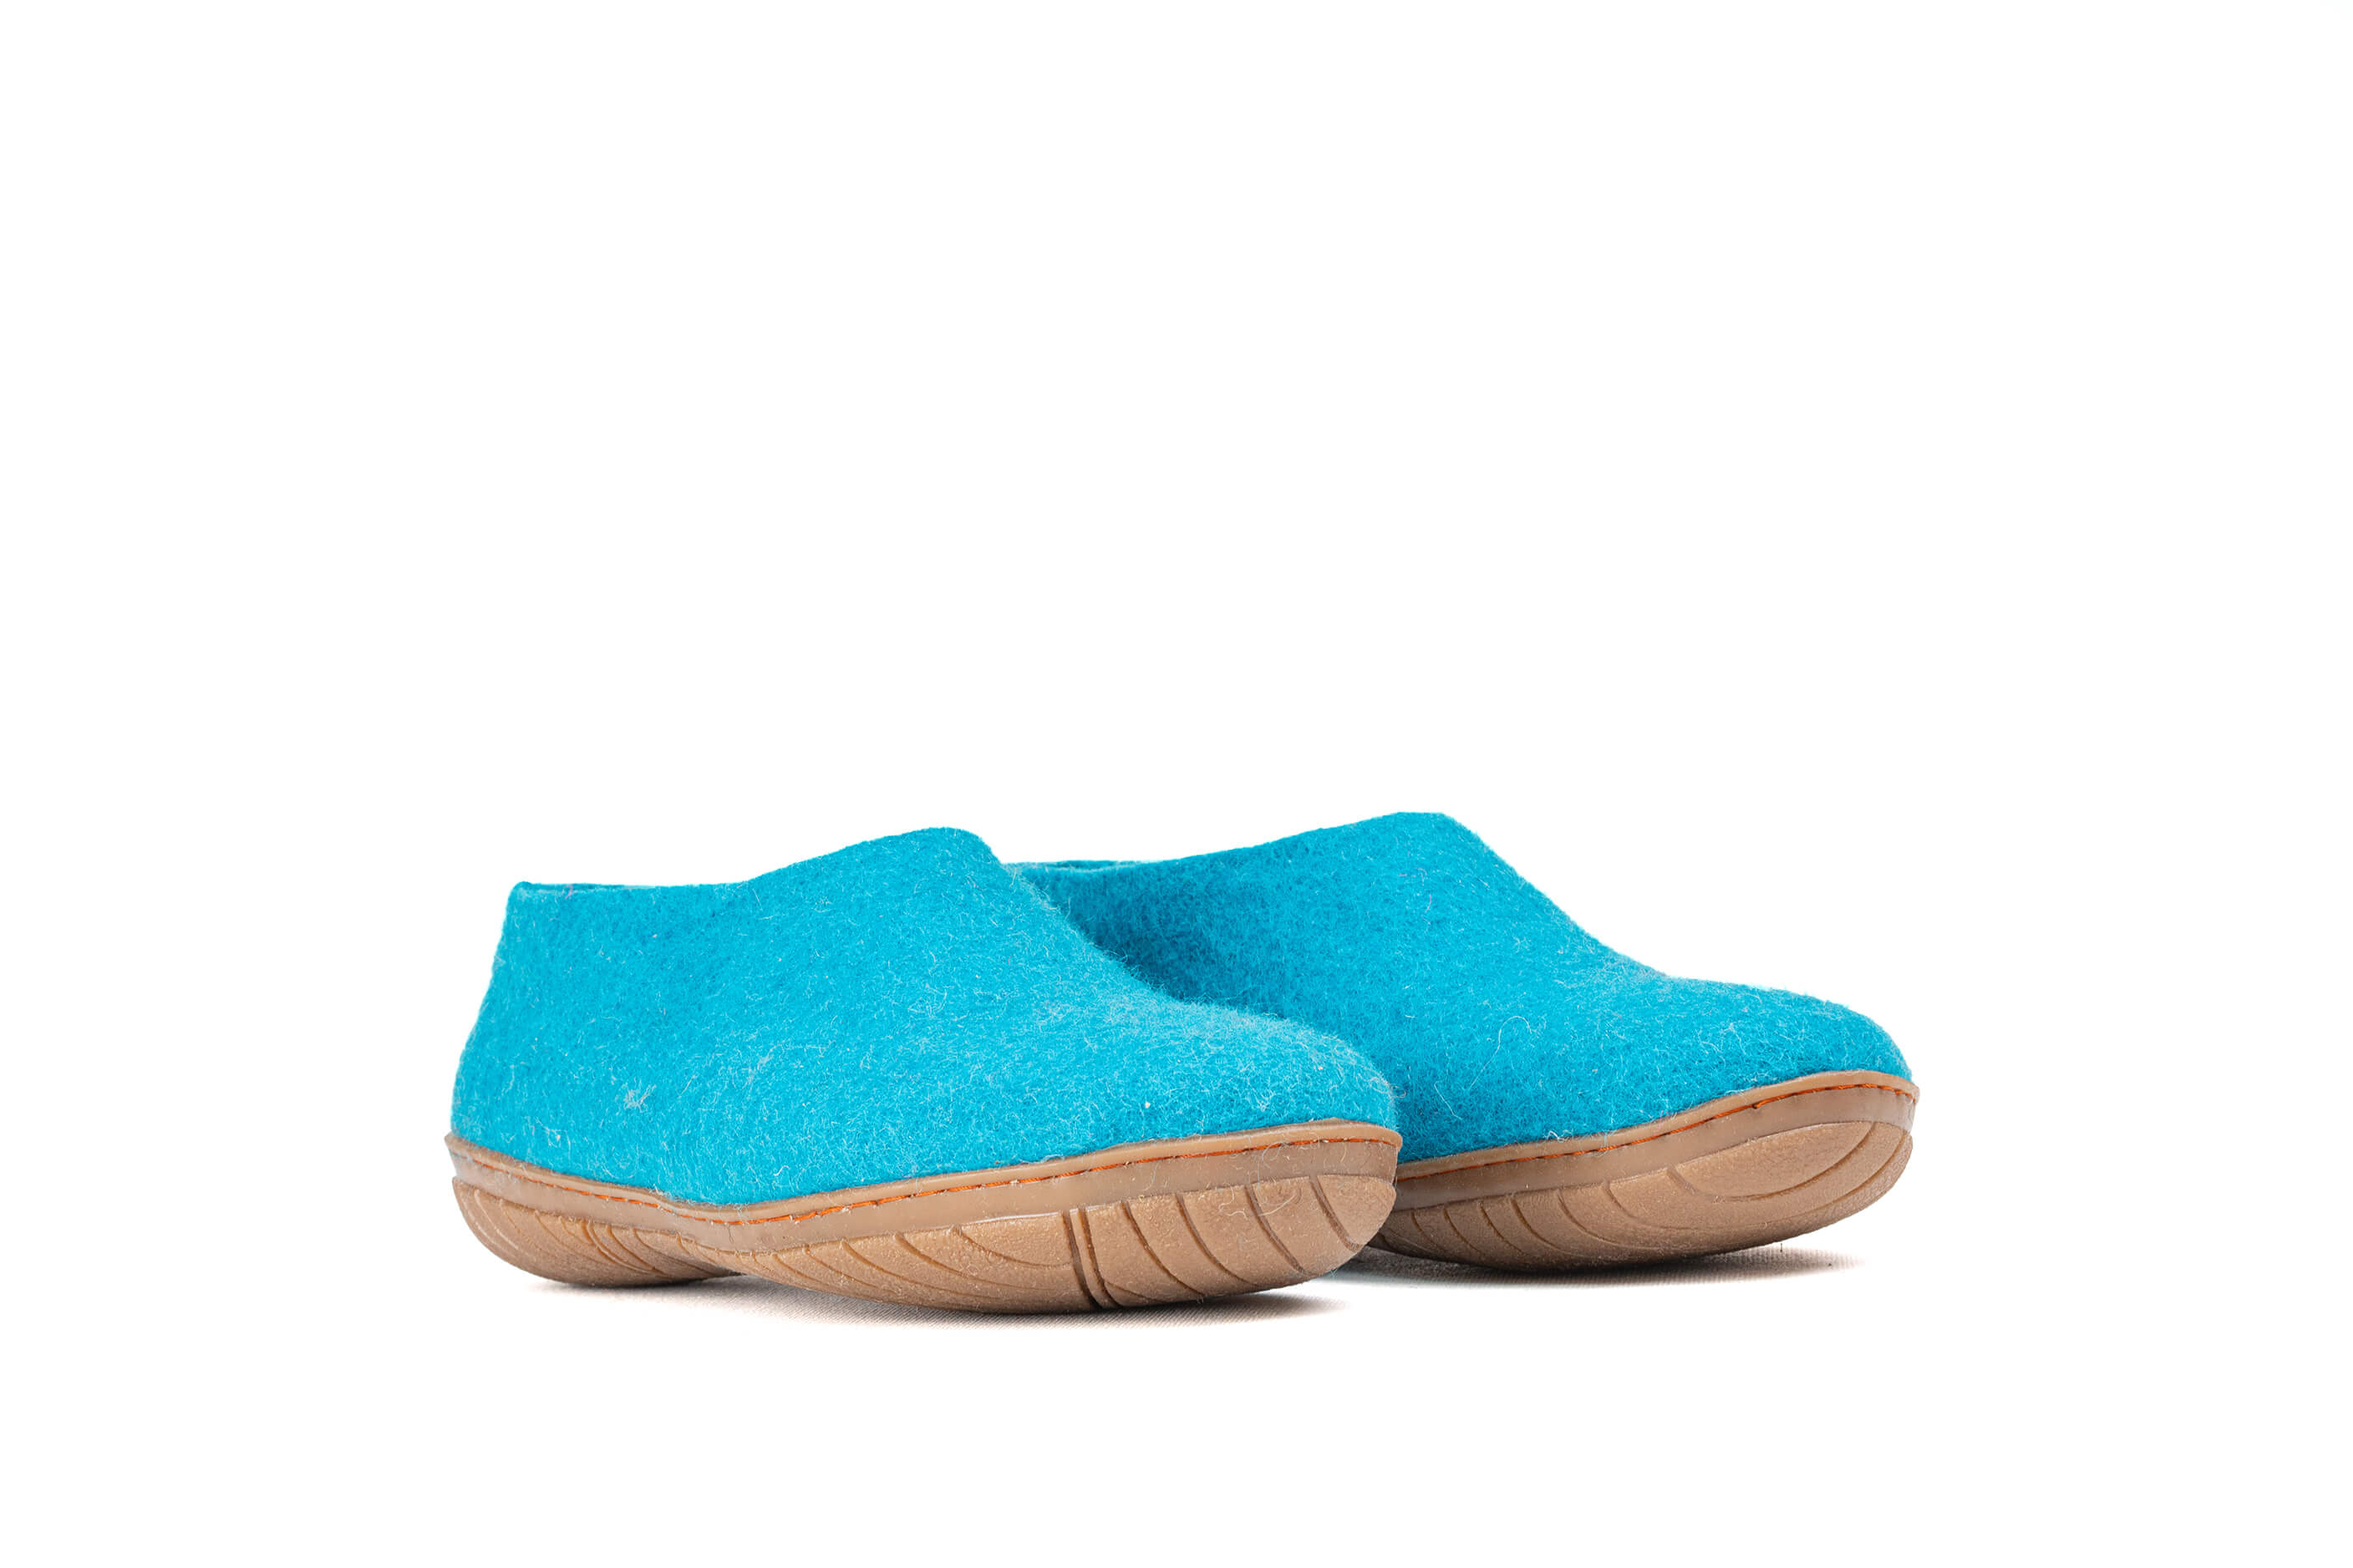 Outdoor Shoes With Rubber Sole - Turquoise